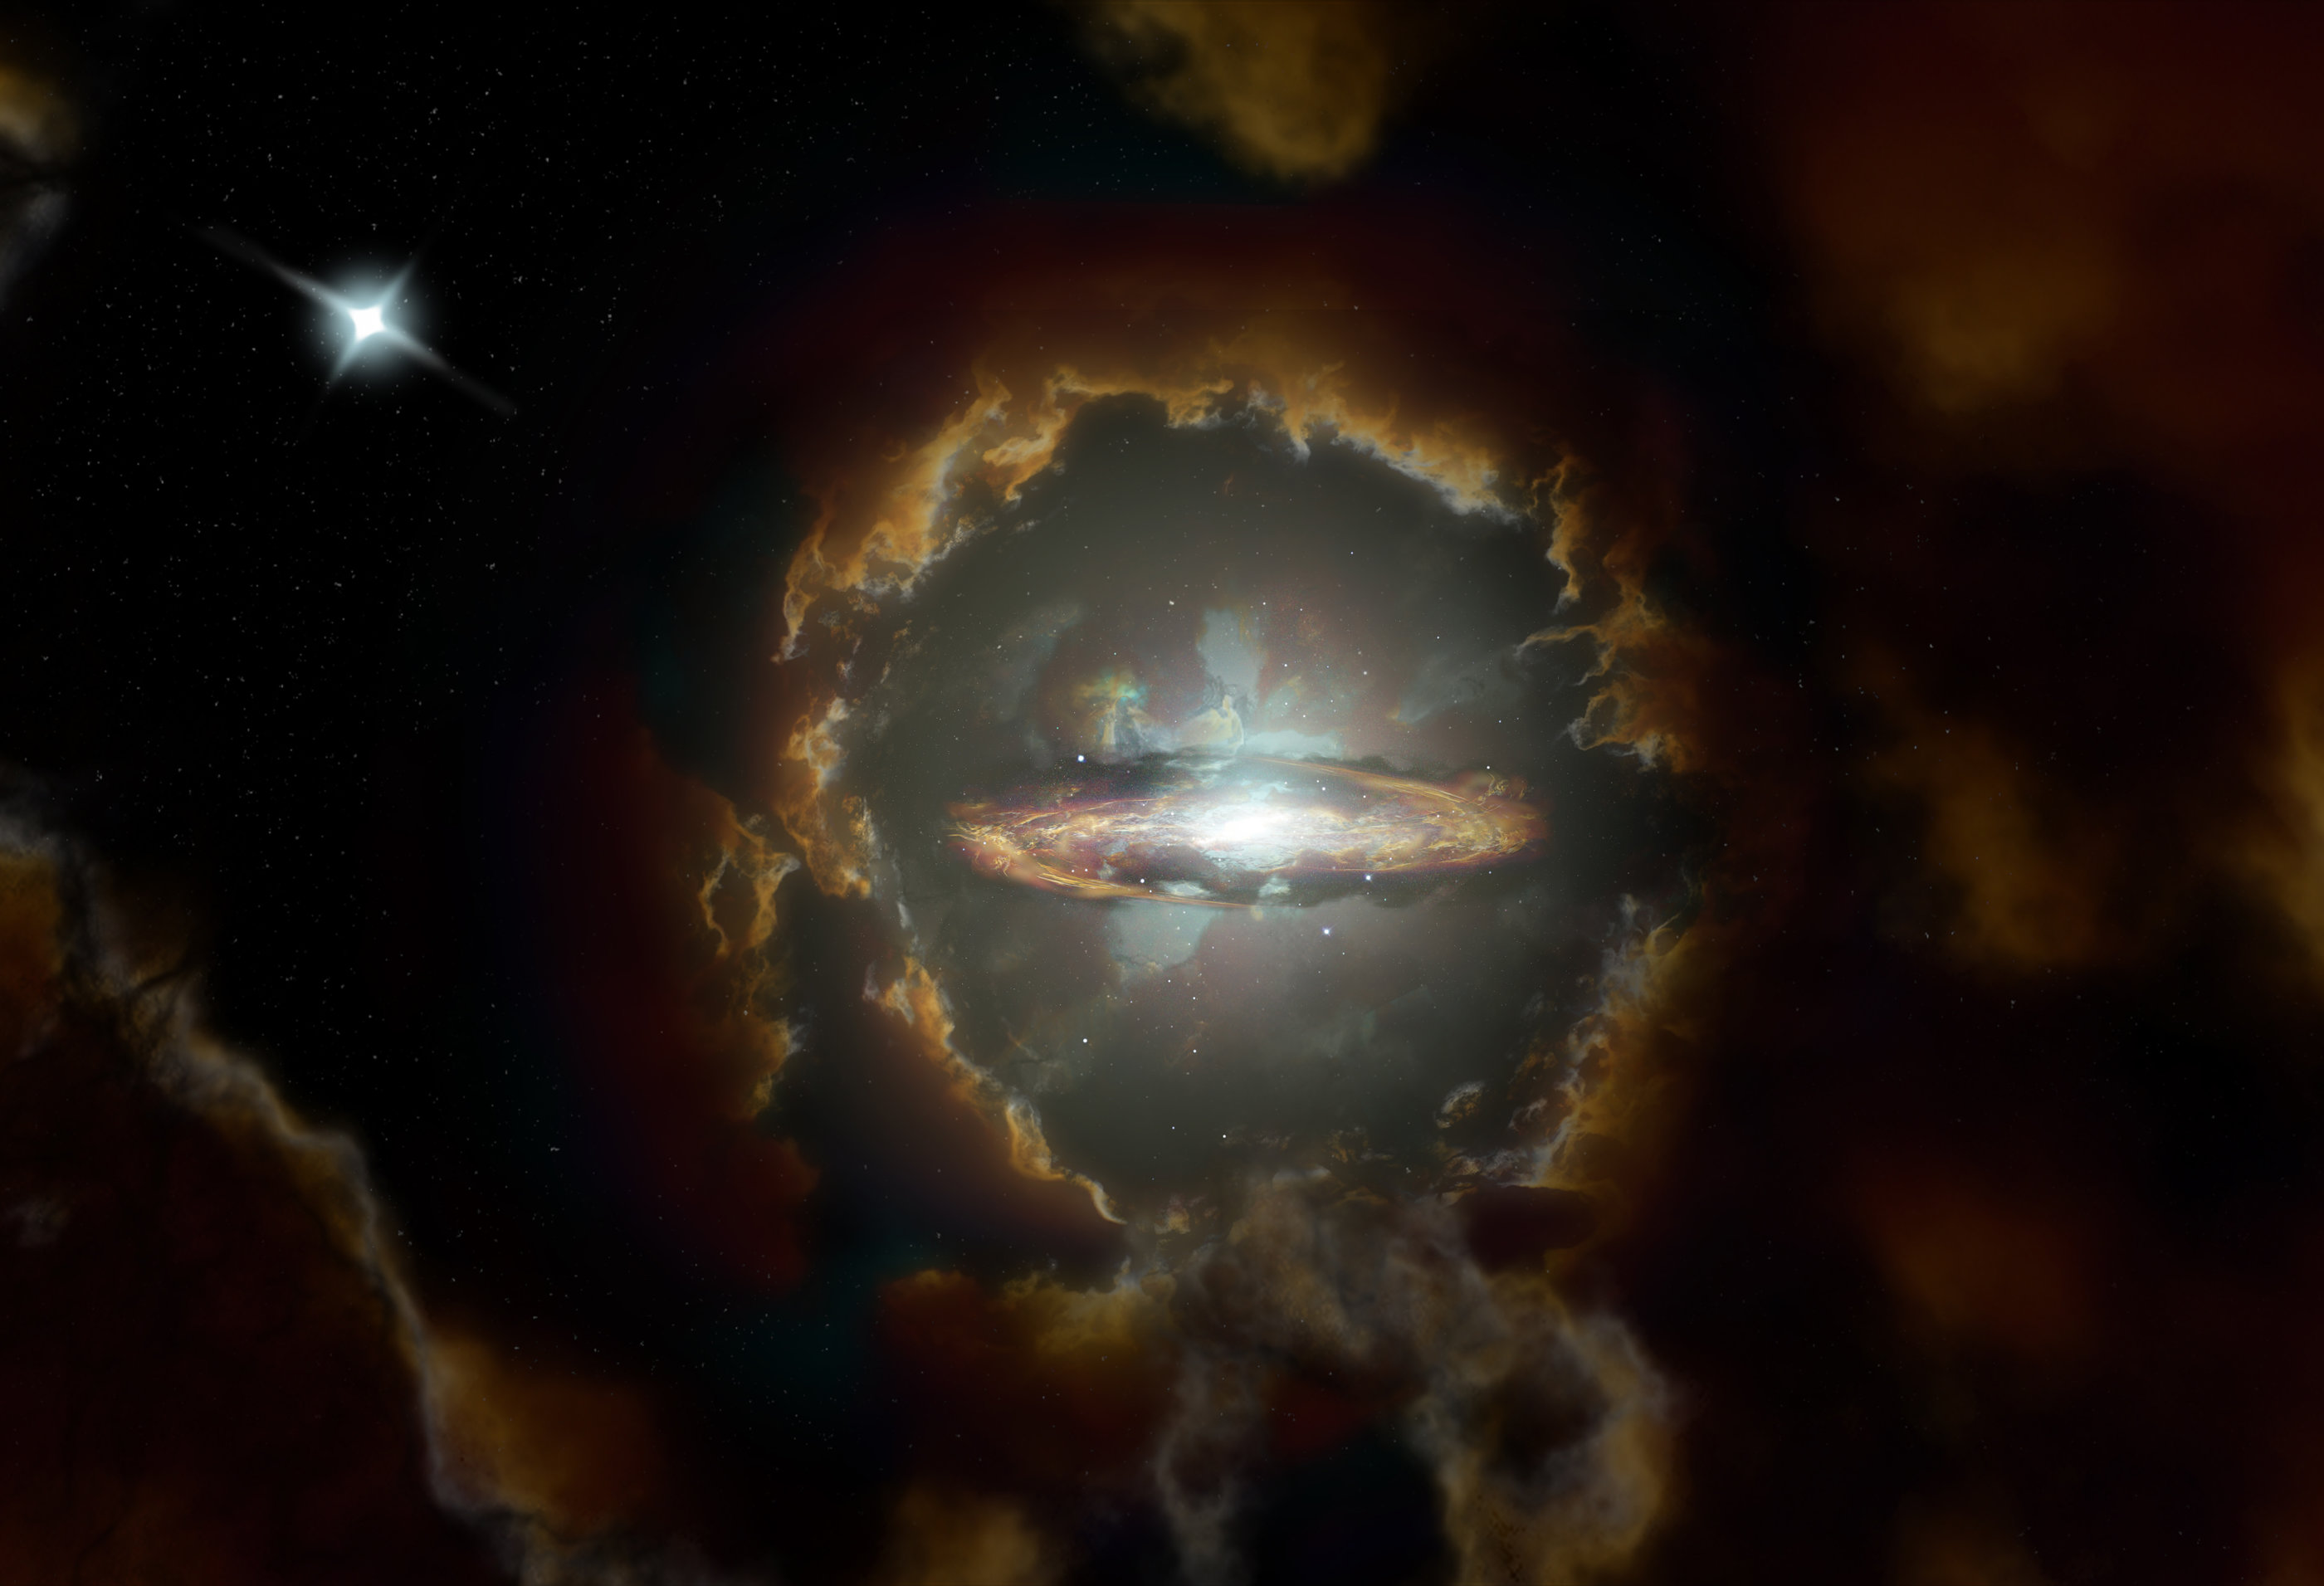 11 Elliptical Galaxies Facts: The Mysteries of the Universe 